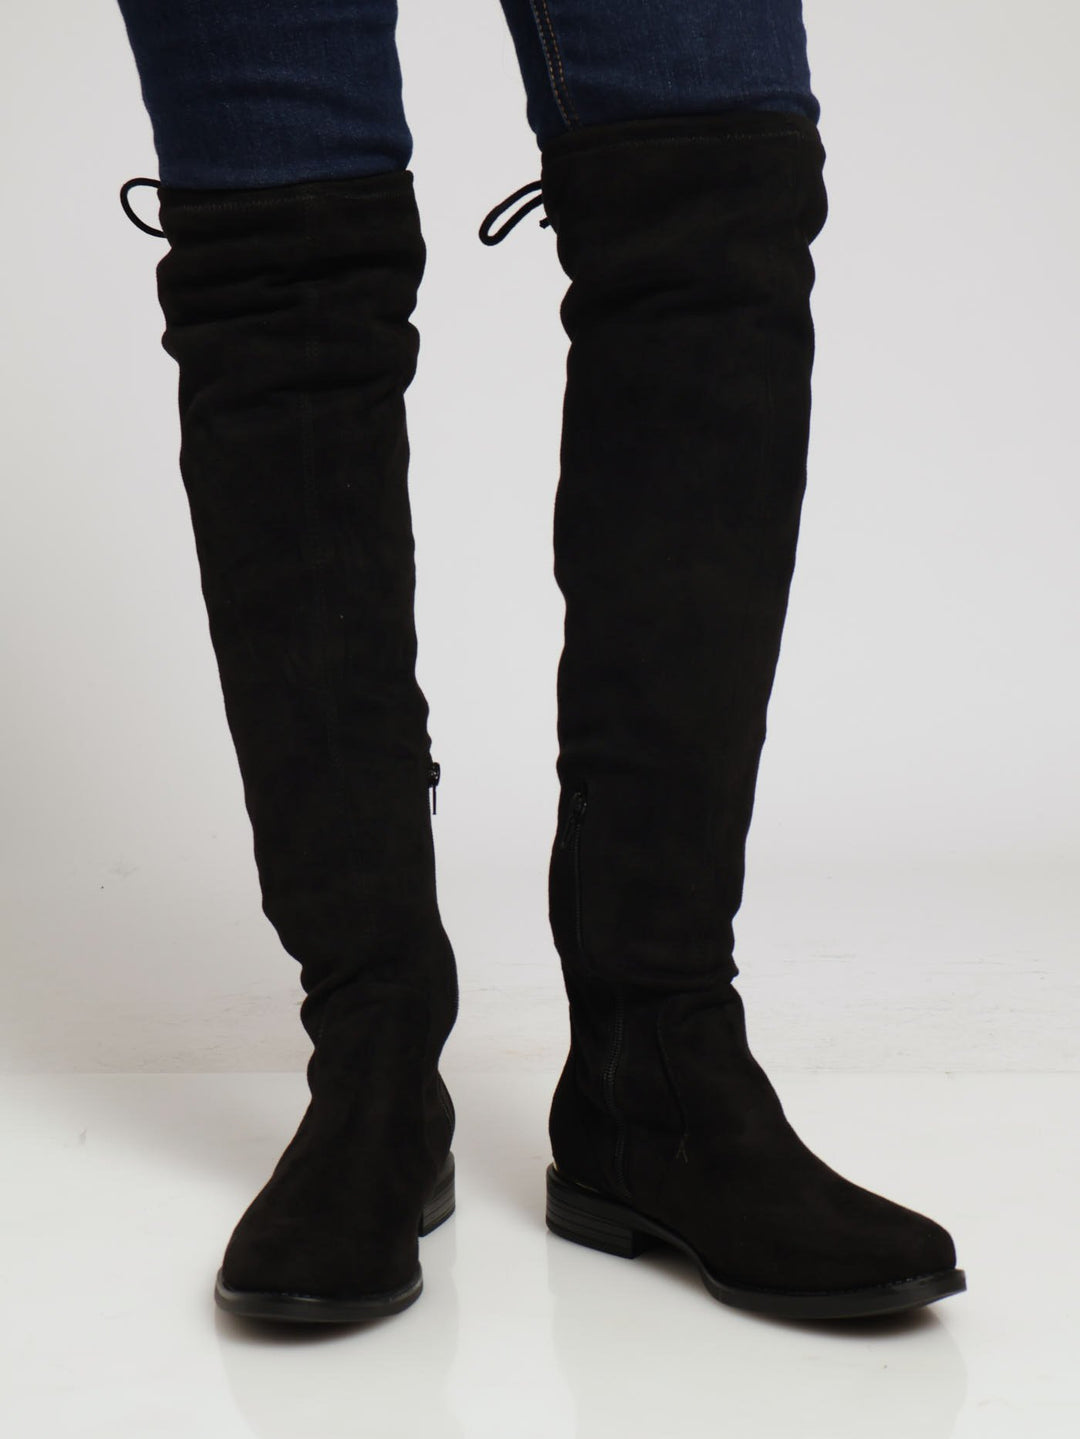 Anidda Over The Knee Boot - Black